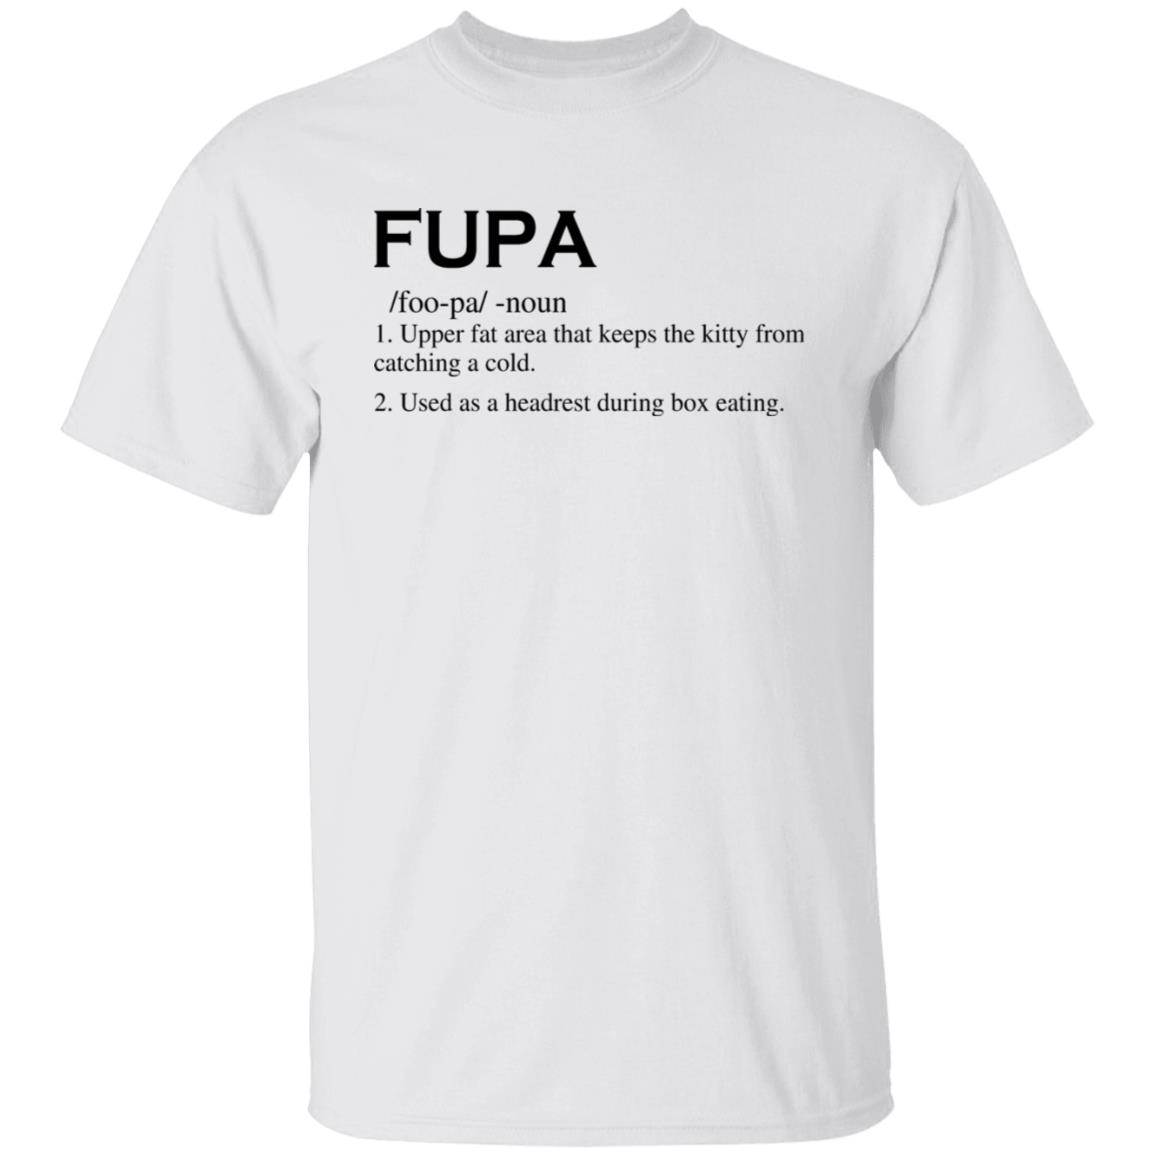 What does FUPE stand for?